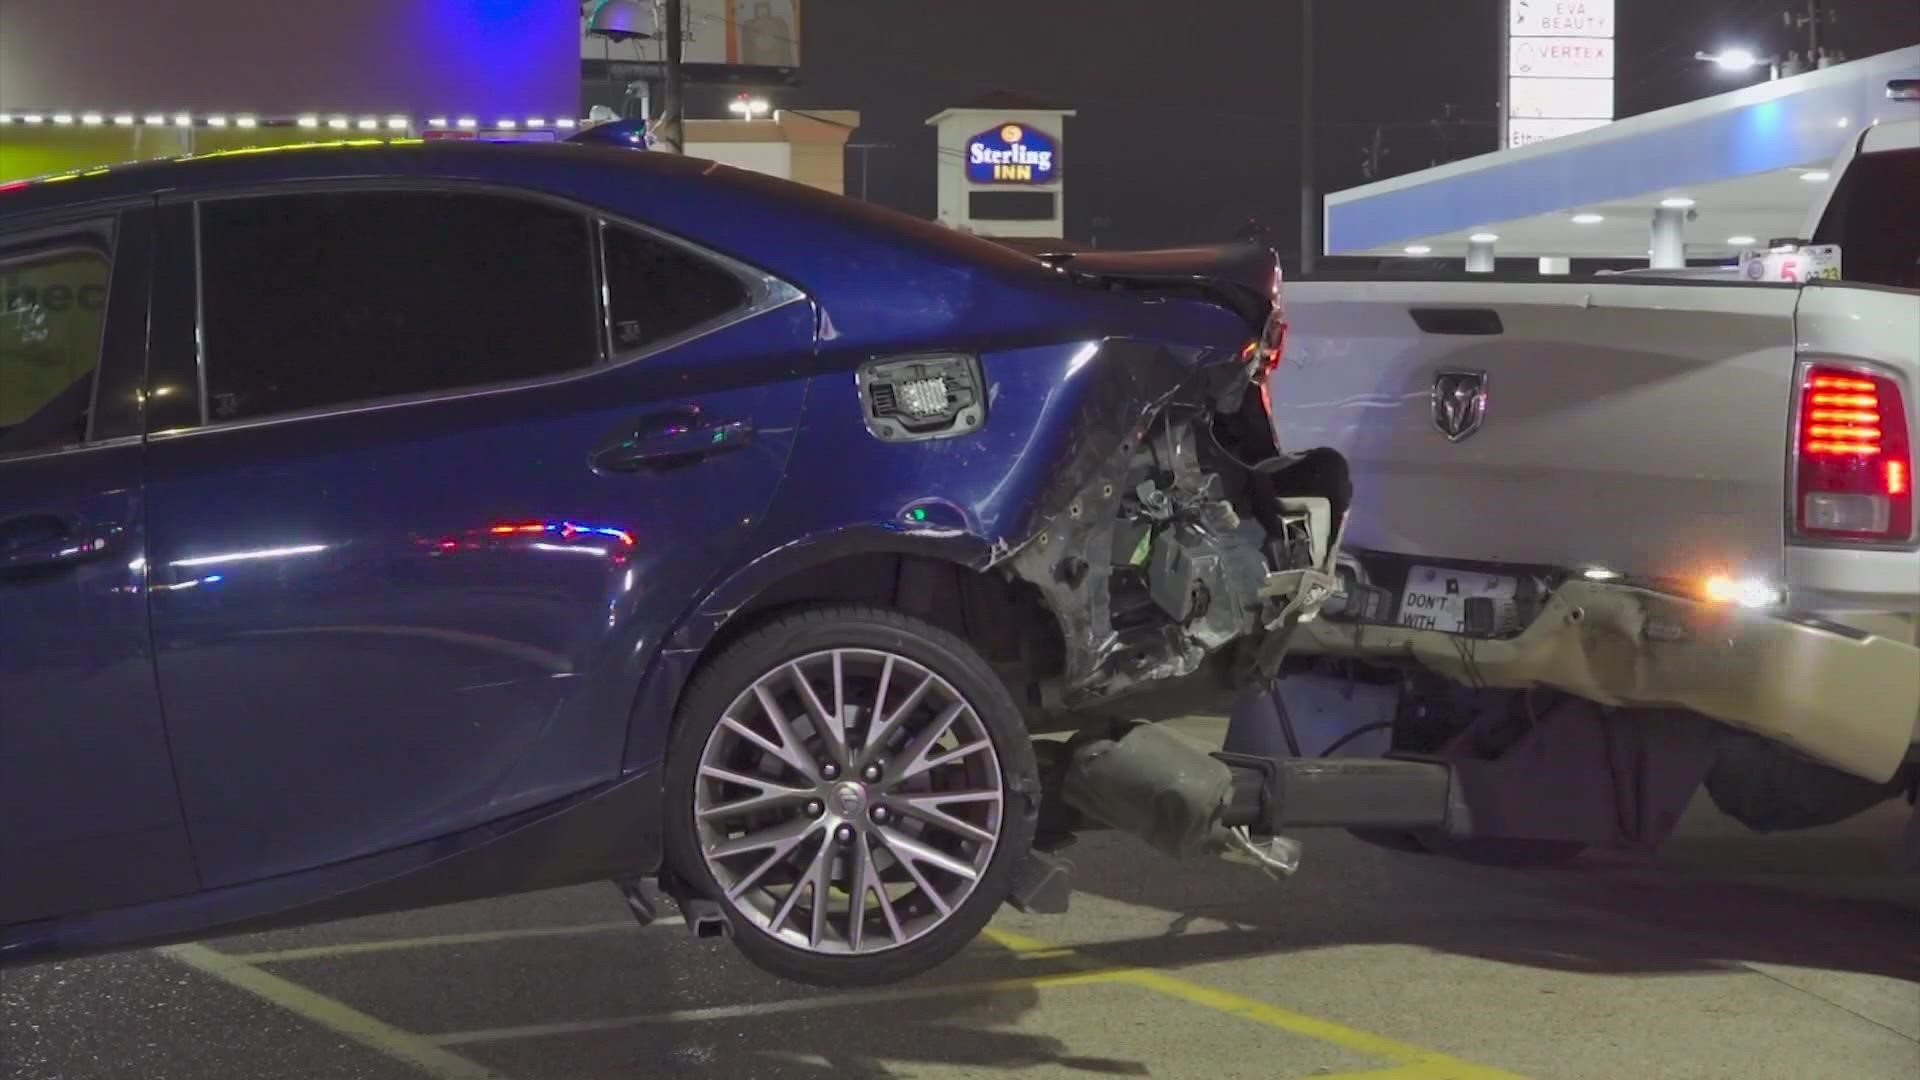 A police officer was injured when a suspected drunk driver hit them while they were involved in a separate chase in southwest Houston early Tuesday, police said.